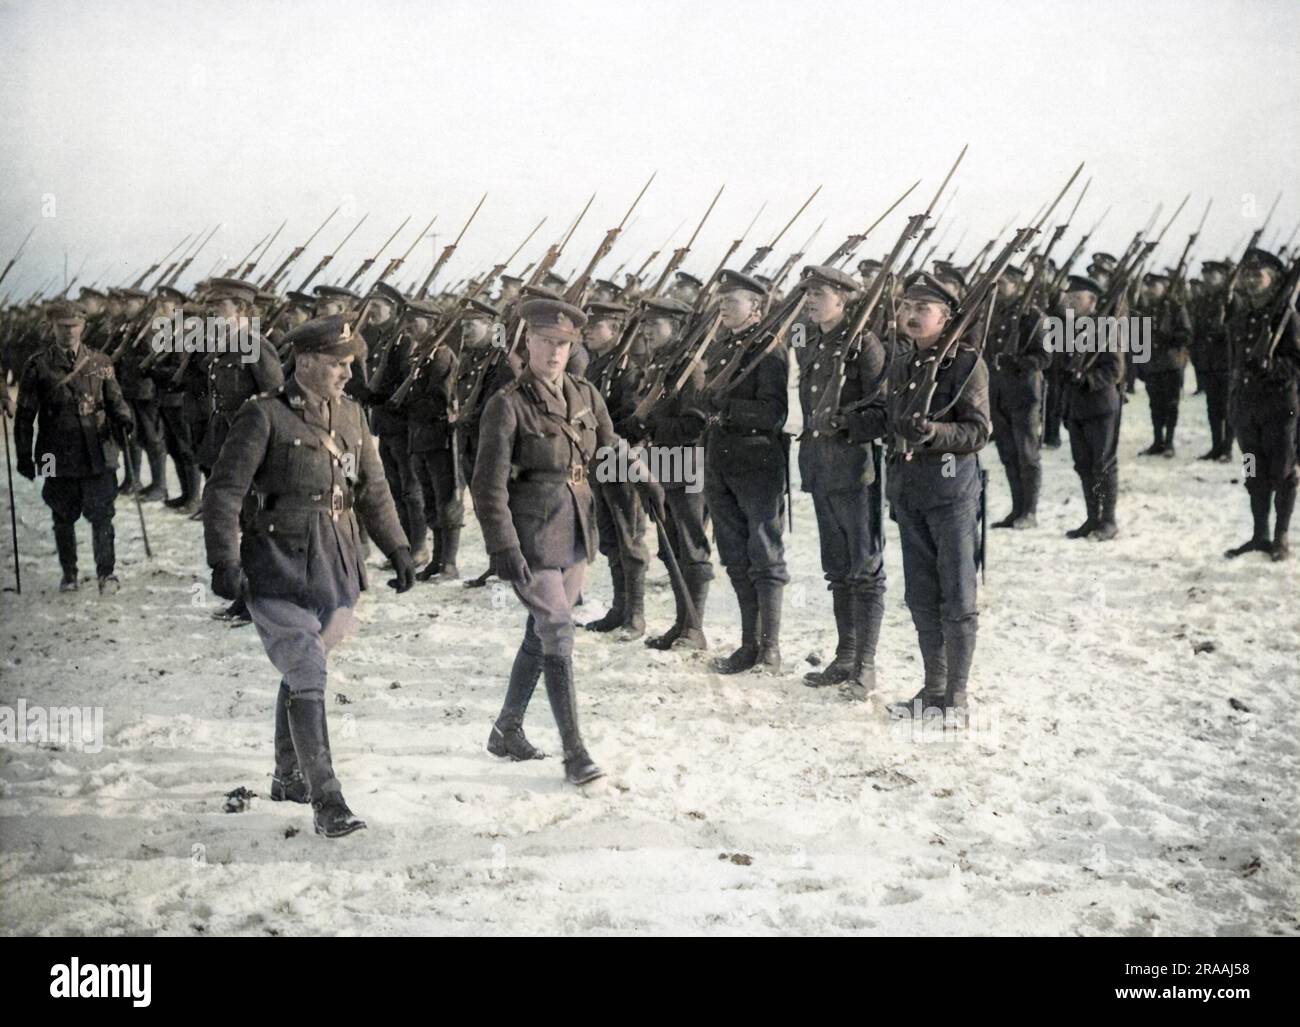 Edward, Prince of Wales (later King Edward VIII) inspecting a battalion on the Western Front in France during World War One.     Date: circa 1916 Stock Photo